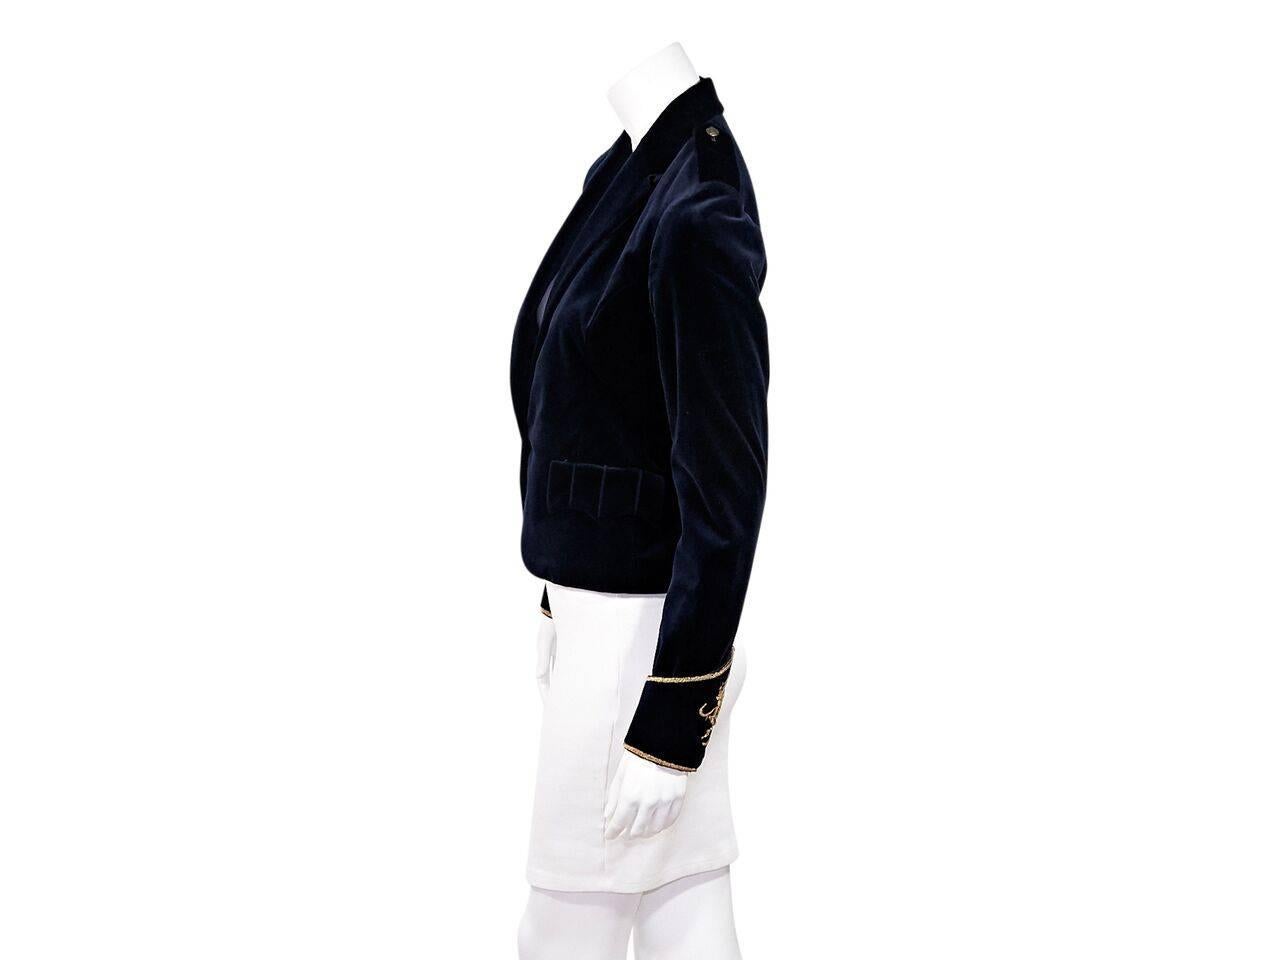 Product details:  Navy blue velvet blazer by Ralph Lauren.  Shoulder epaulettes.  Notched lapel.  Long sleeves.  Embroidered and embellished metallic gold cuffs.  Single button closure.  Flap waist pockets.  
Condition: Pre-owned. Very good.
Est.